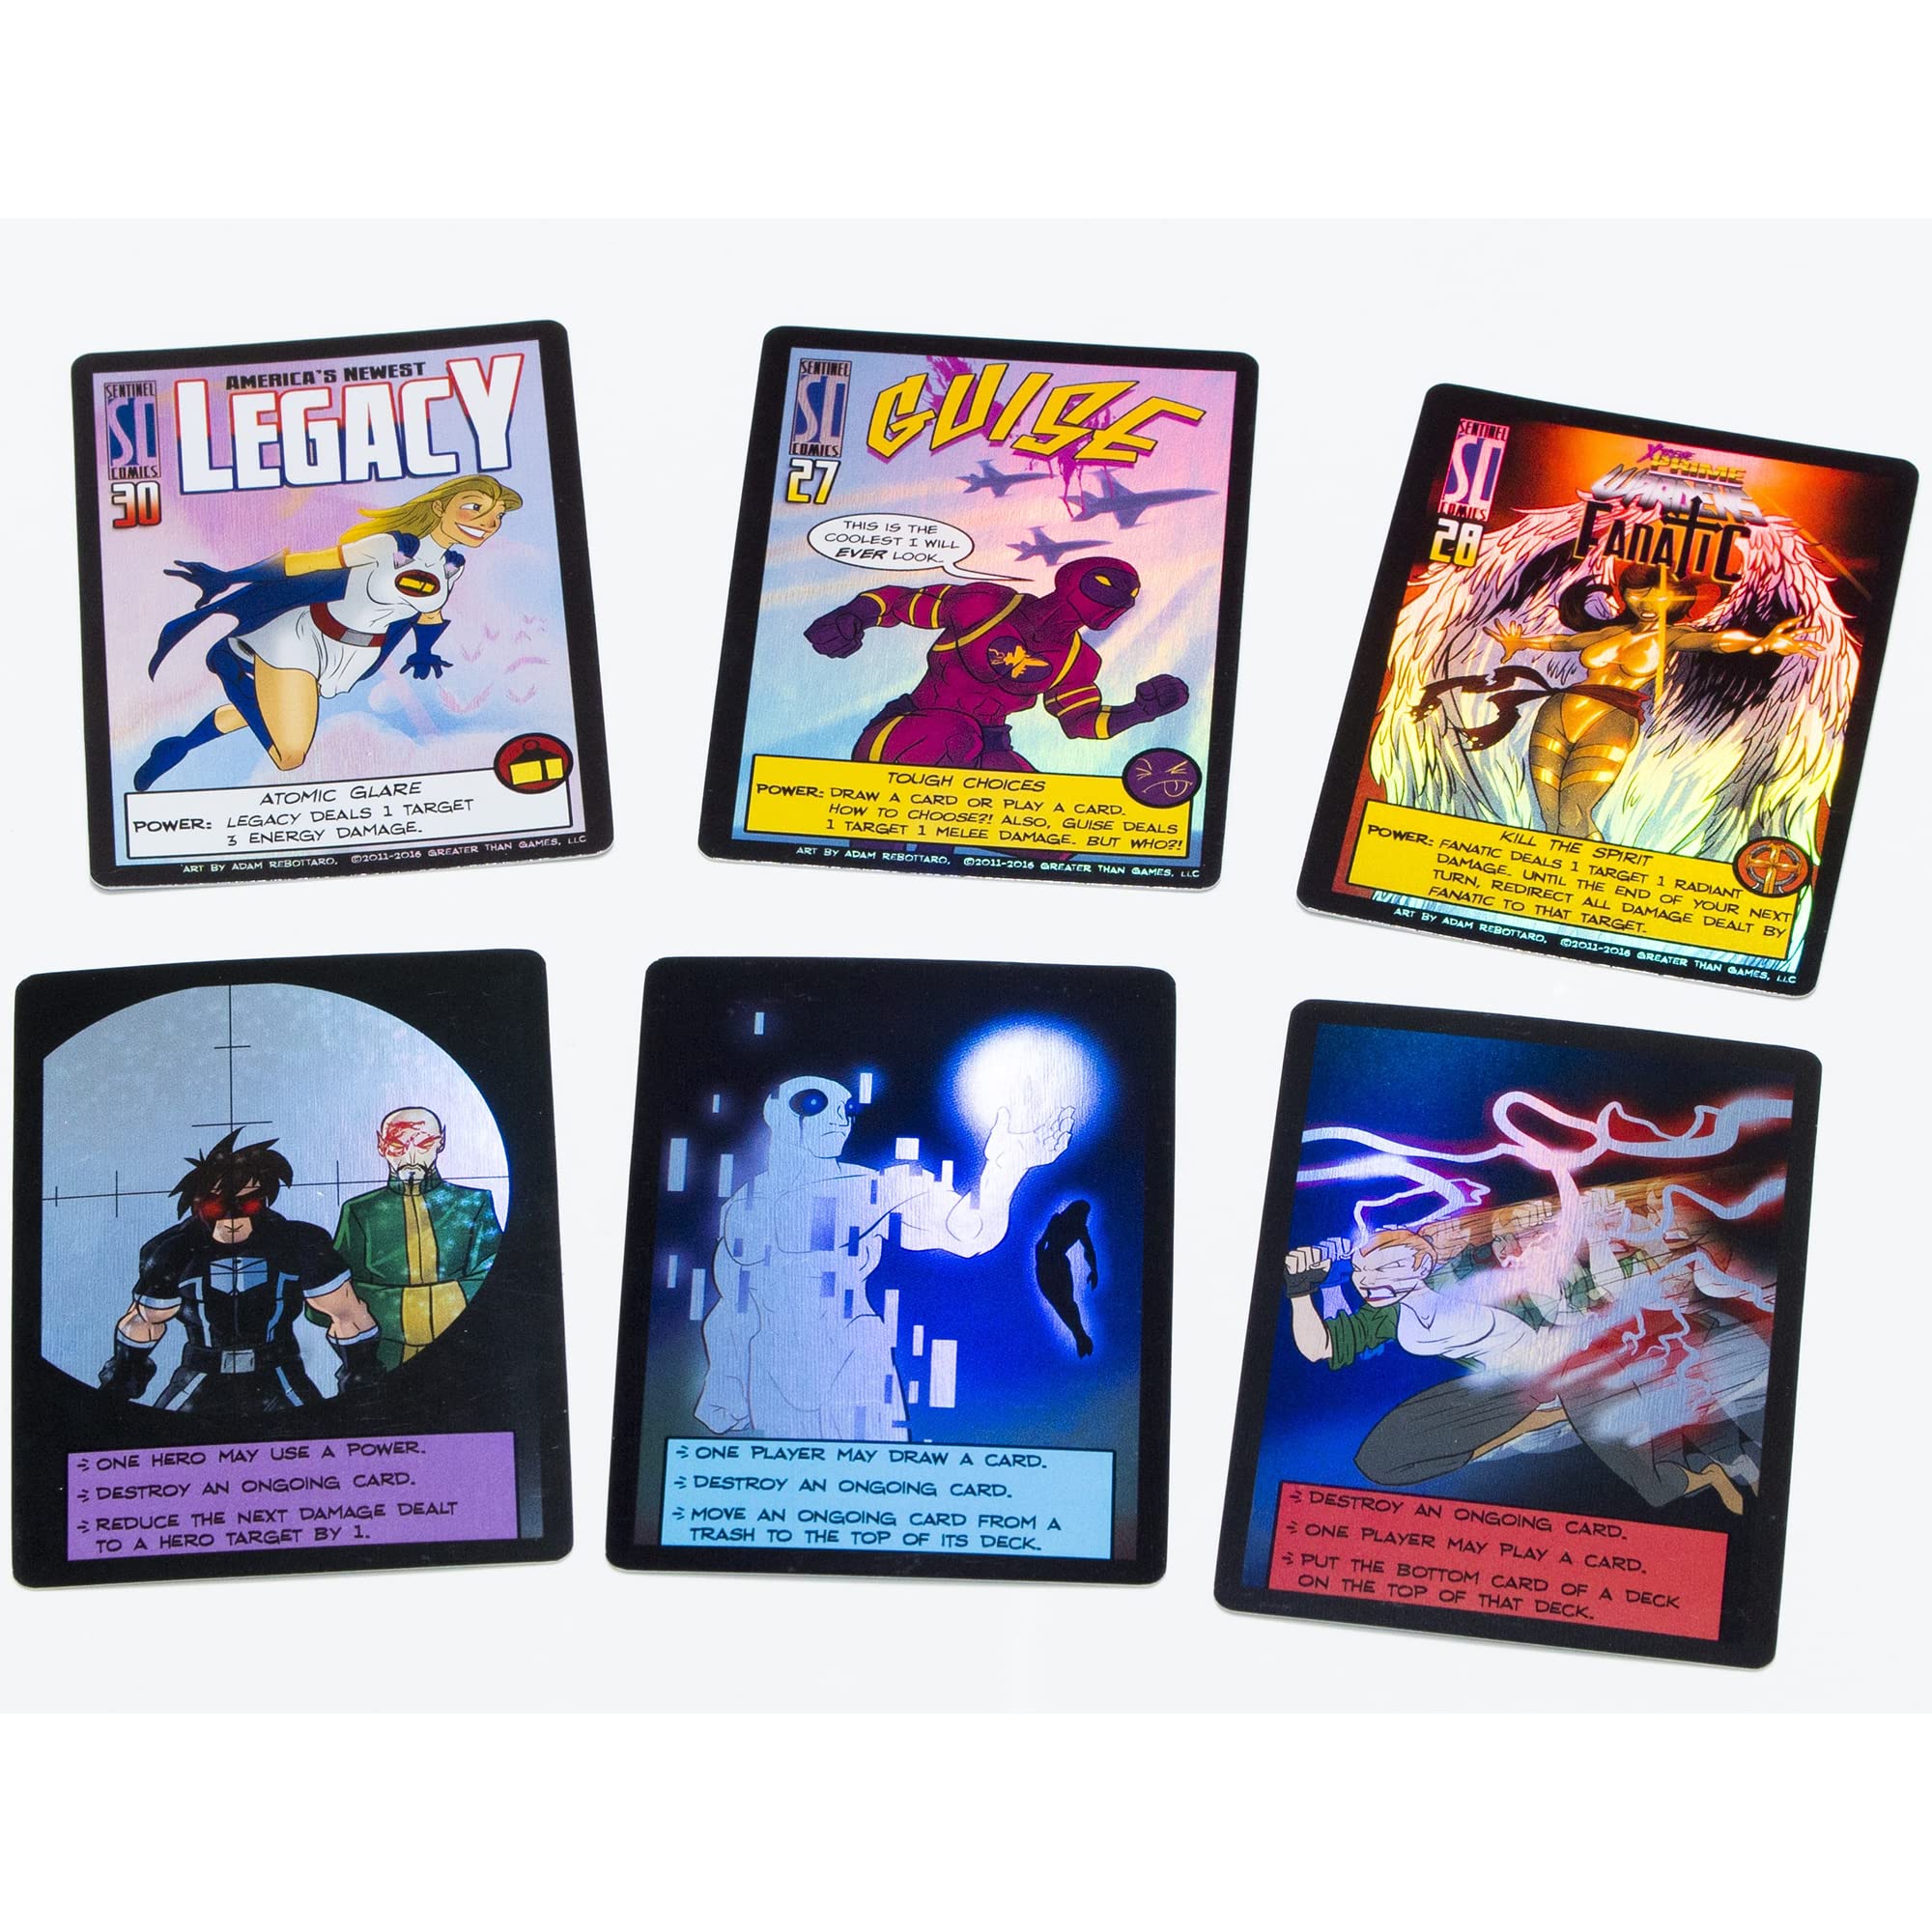 Greater Than Games Sentinels of The Multiverse: Complete Hero Variant Collection - Cards Art, RPG Acessory Pack